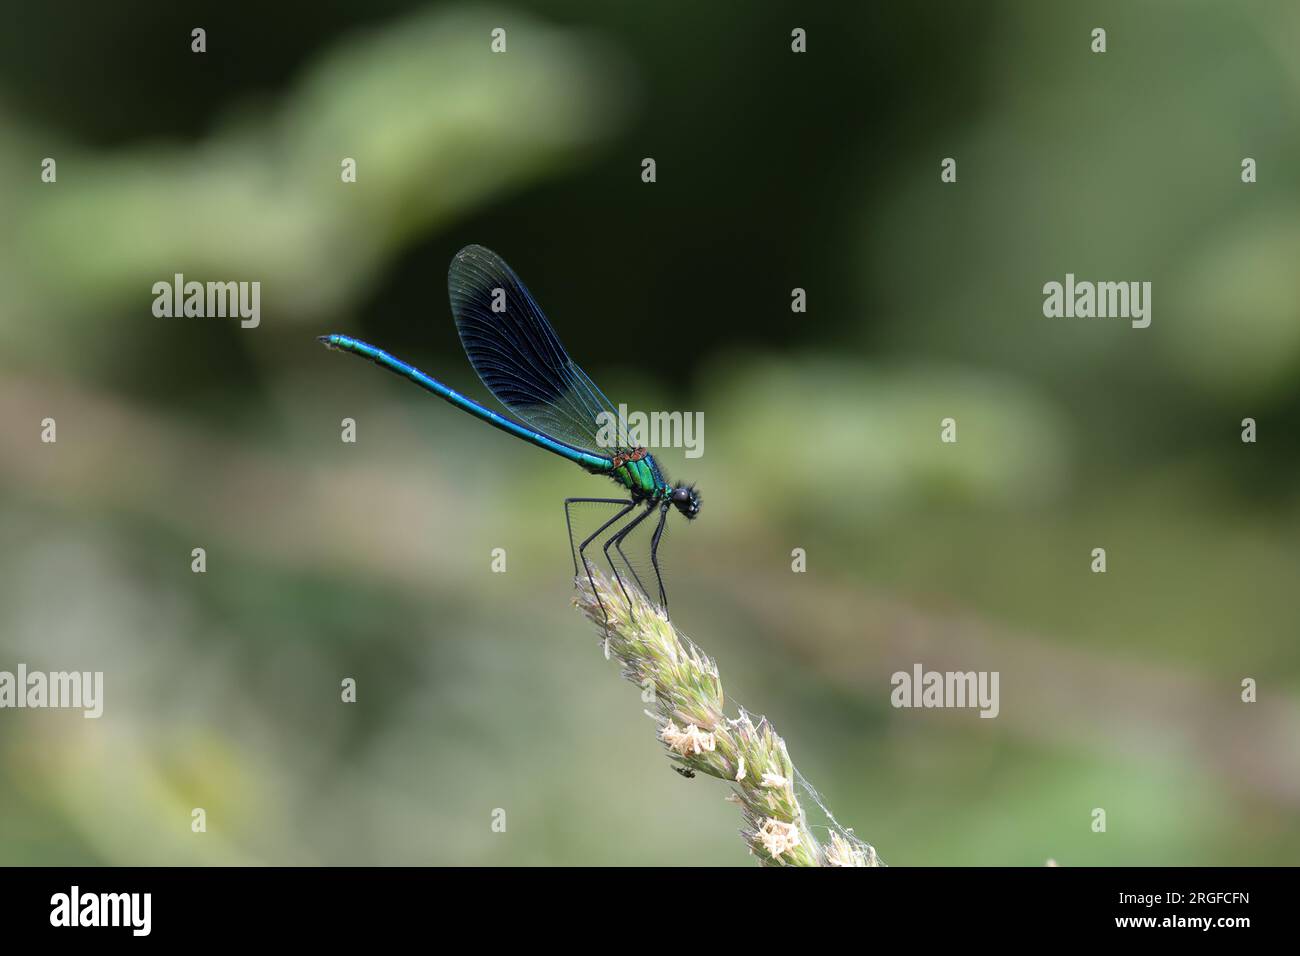 The banded demoiselle is a species of Eurasian damselfly belonging to the family Calopterygidae. It is found along slow-flowing streams and rivers. Stock Photo